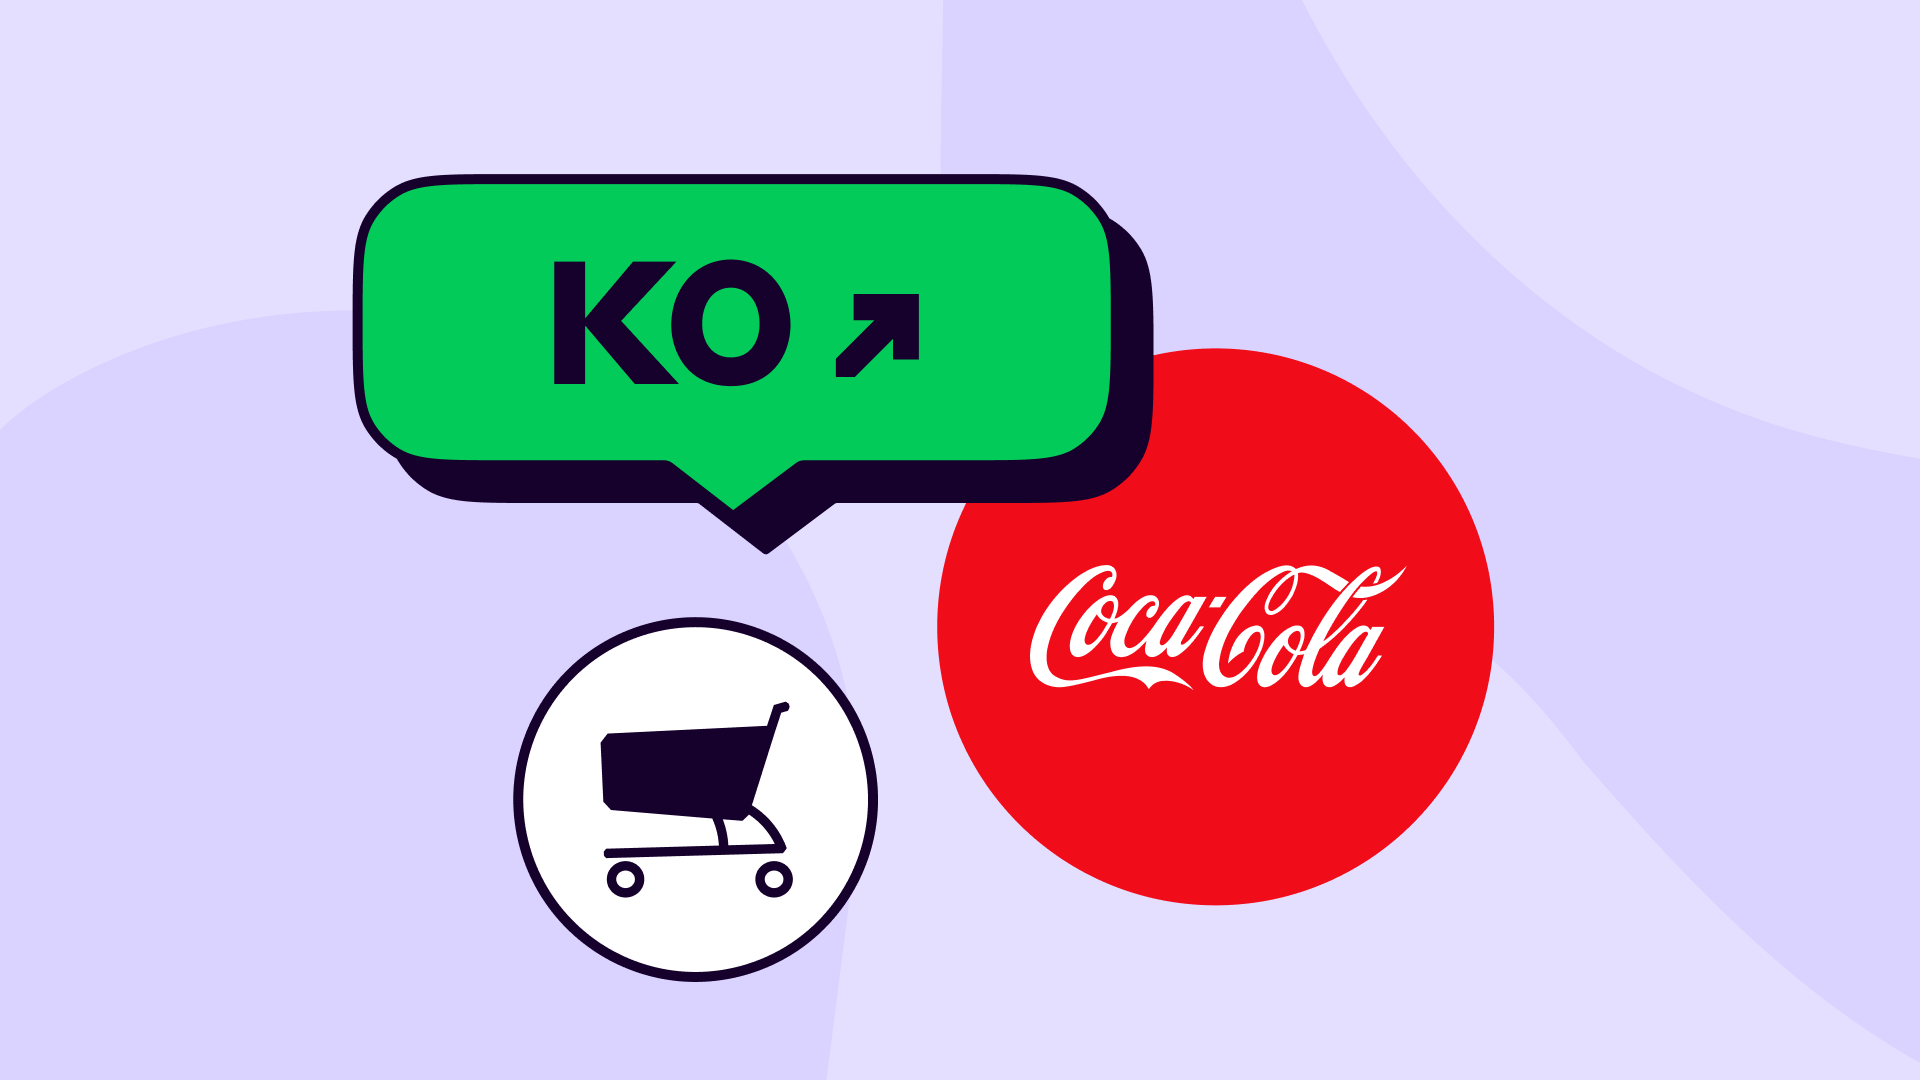 How to buy and sell Coca-Cola shares